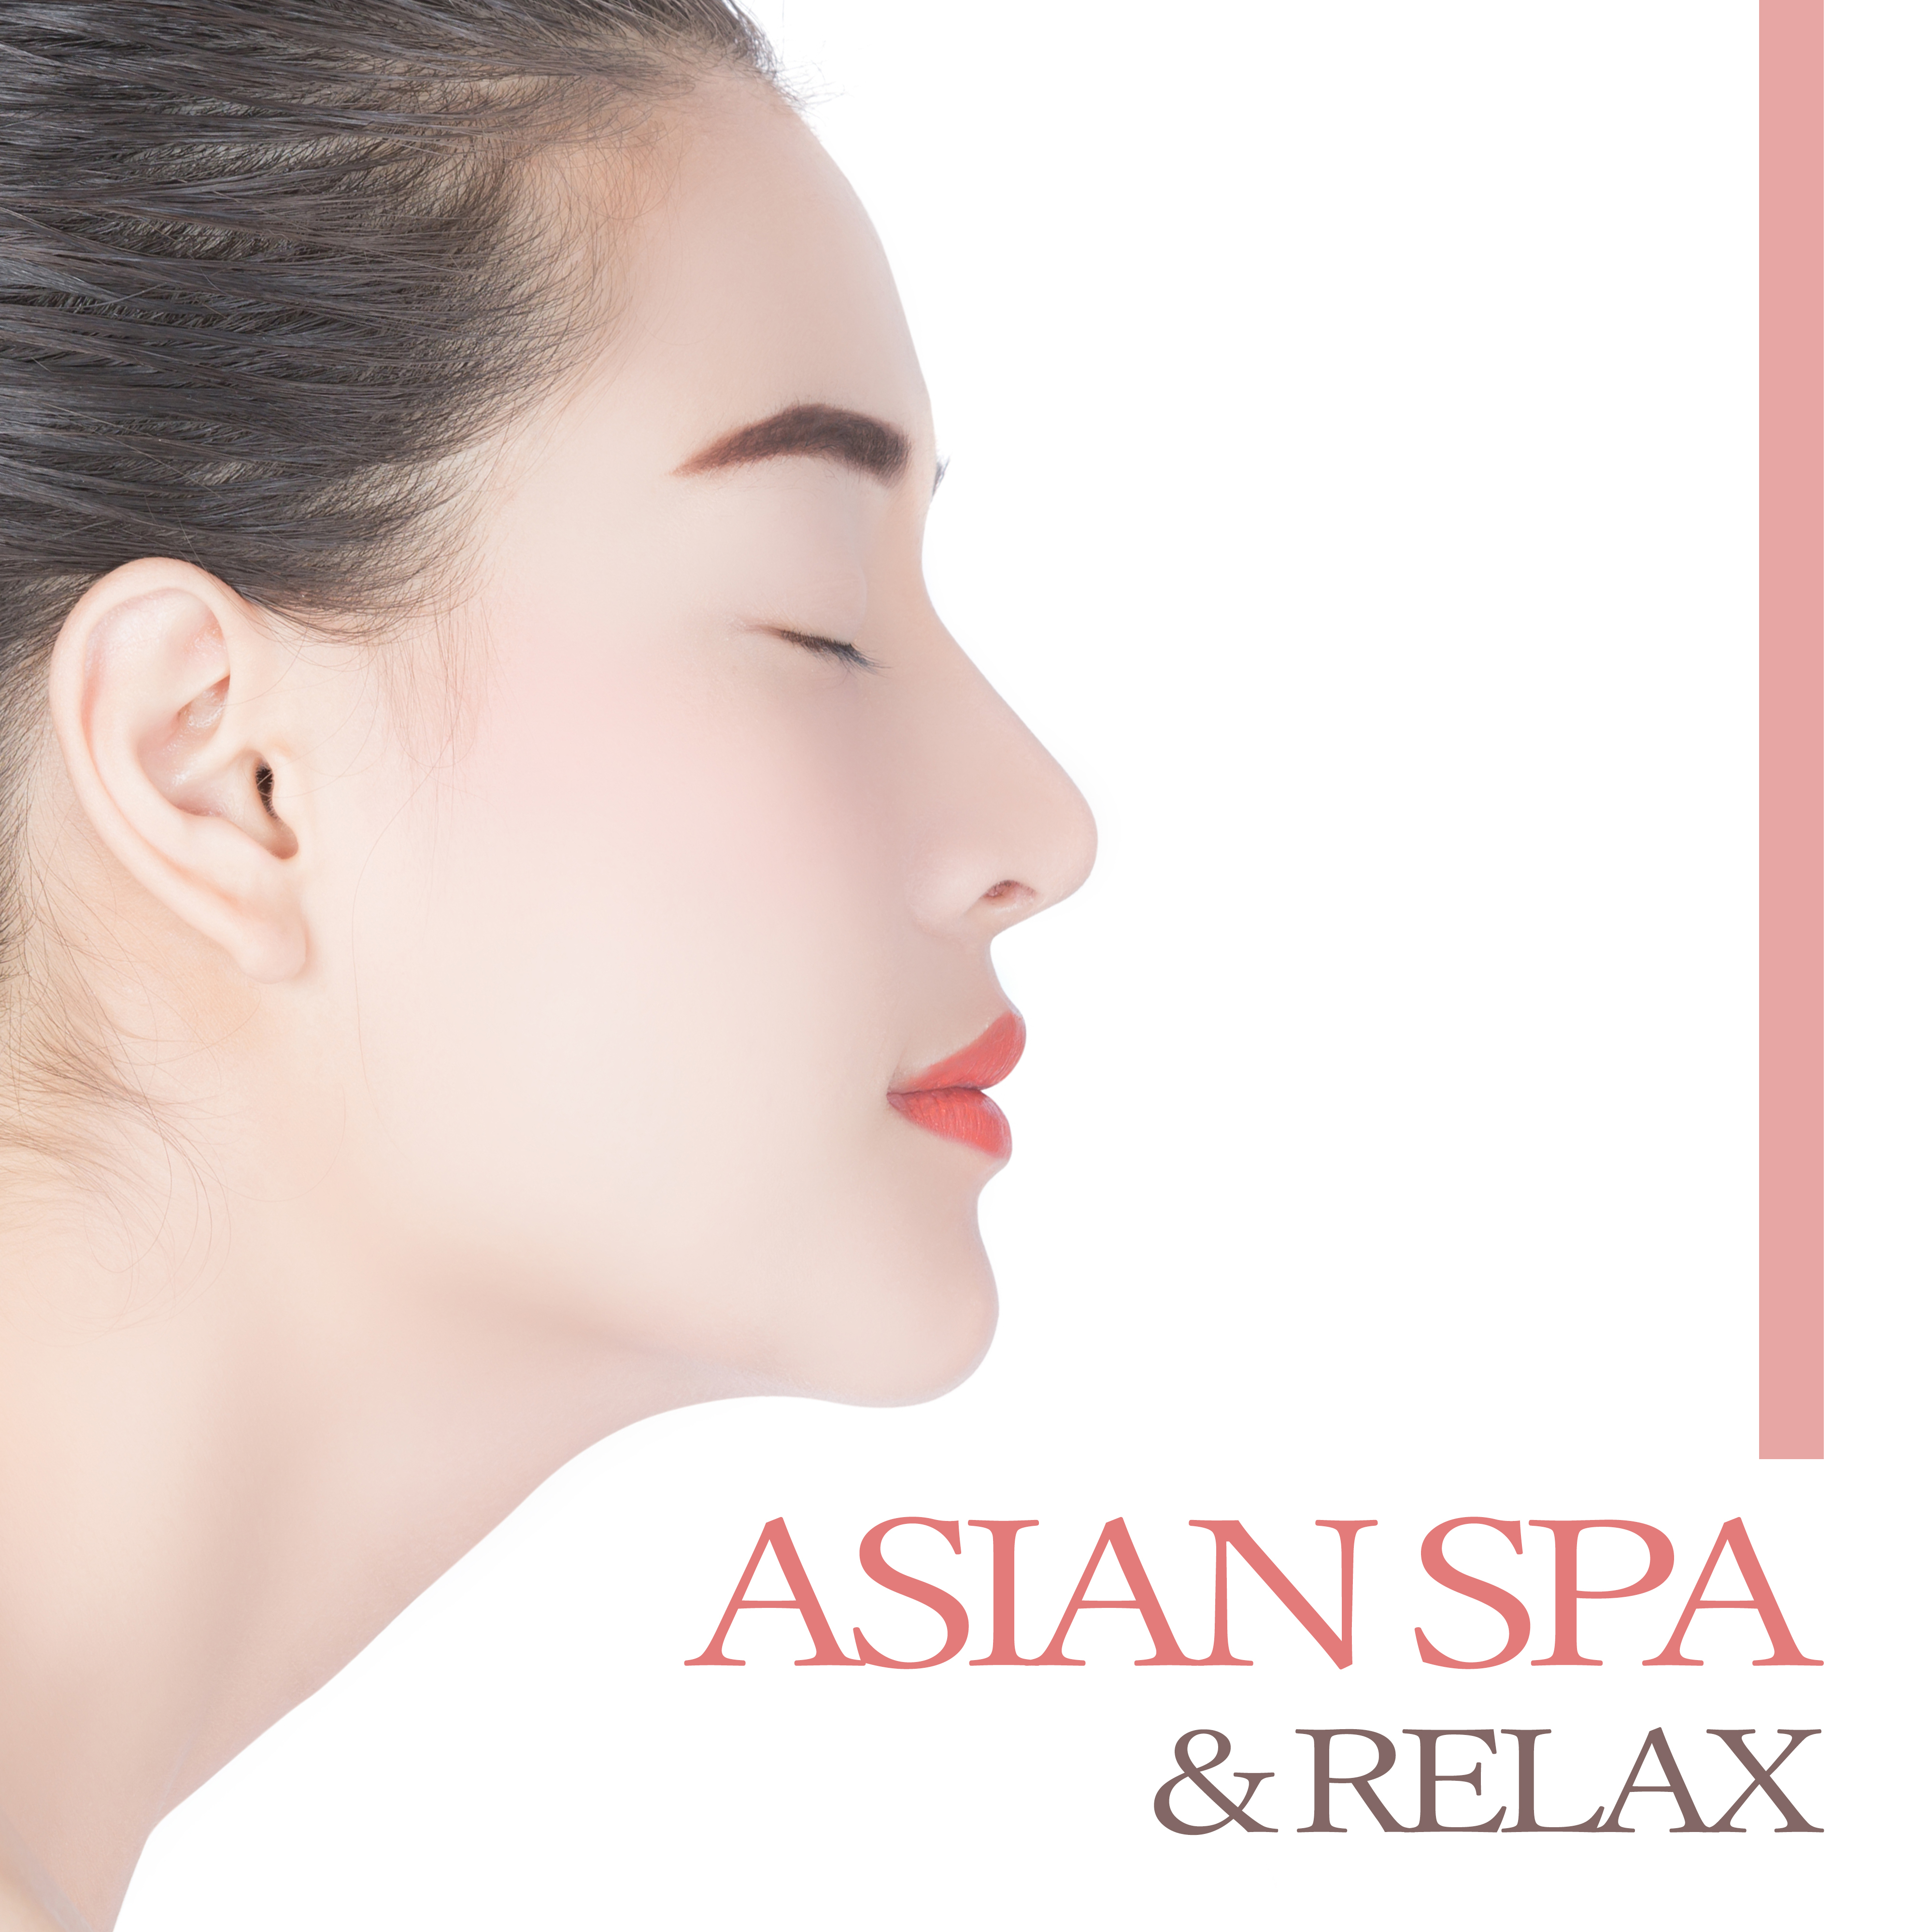 Asian Spa & Relax